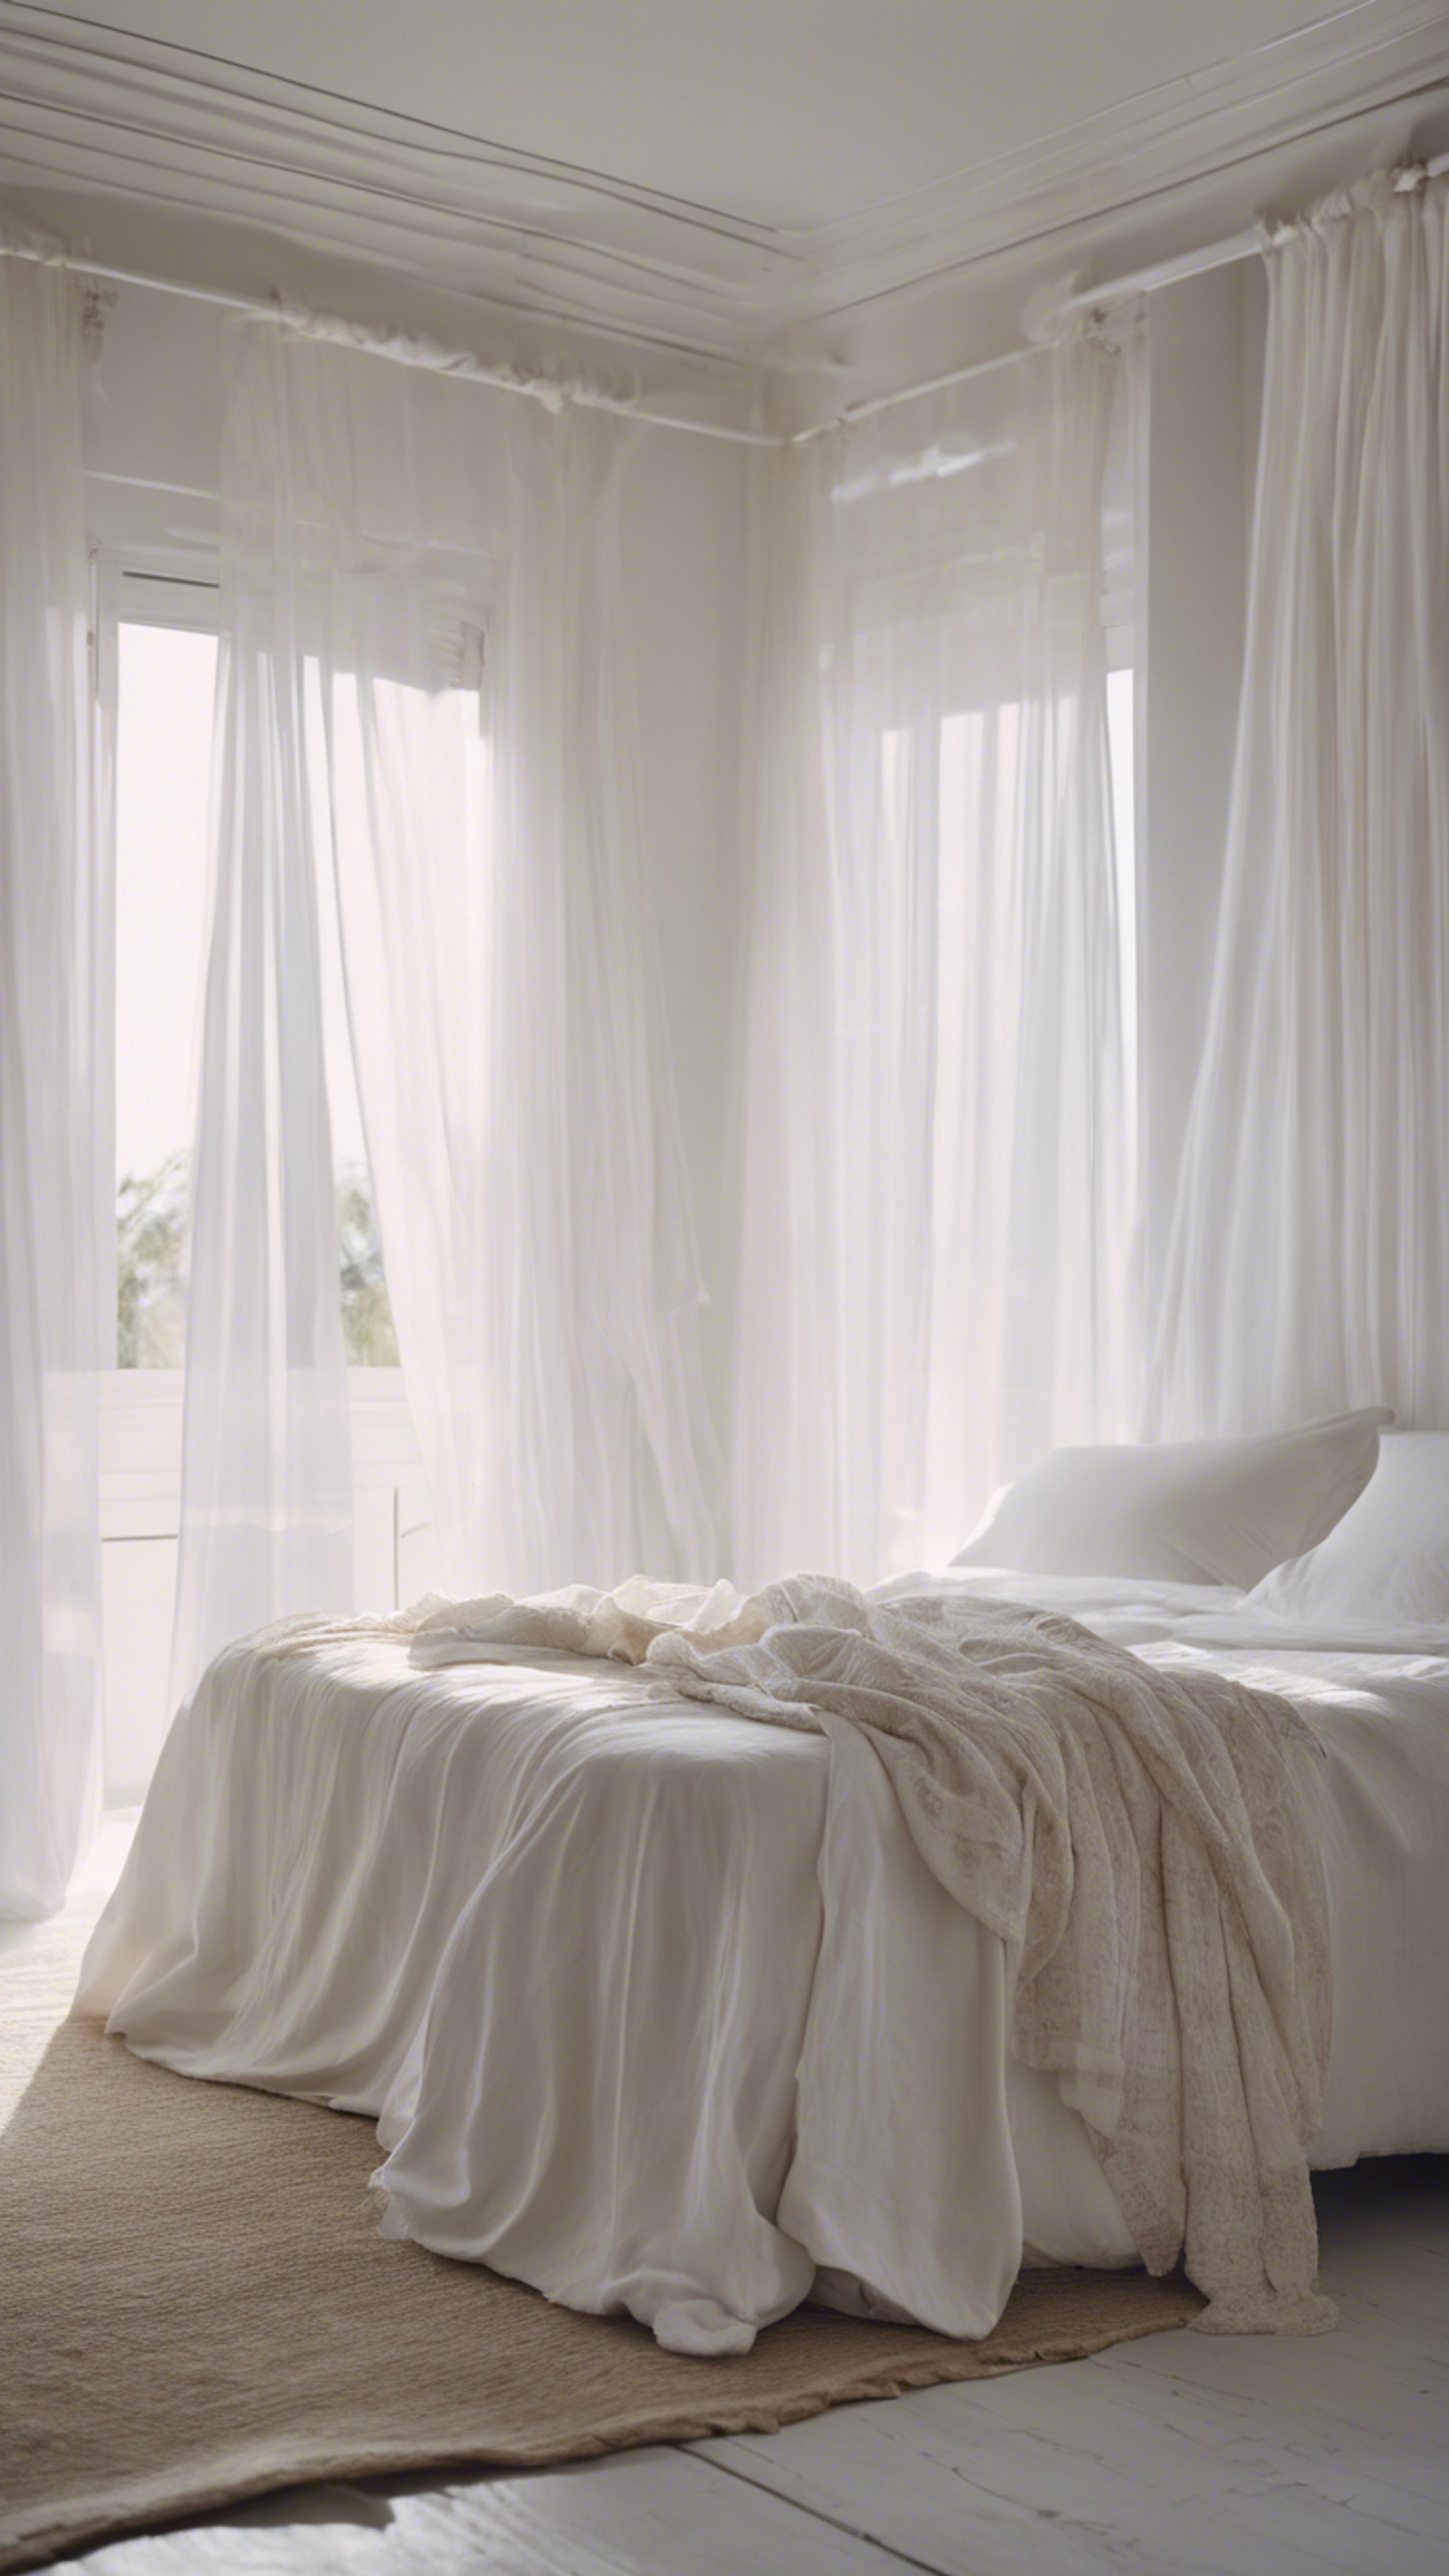 A dreamy white bedroom with sheer curtains blowing in the wind, white bed linens and an array of daylight from the window. Taustakuva[01f8a65ac1ab4b5d8d2d]